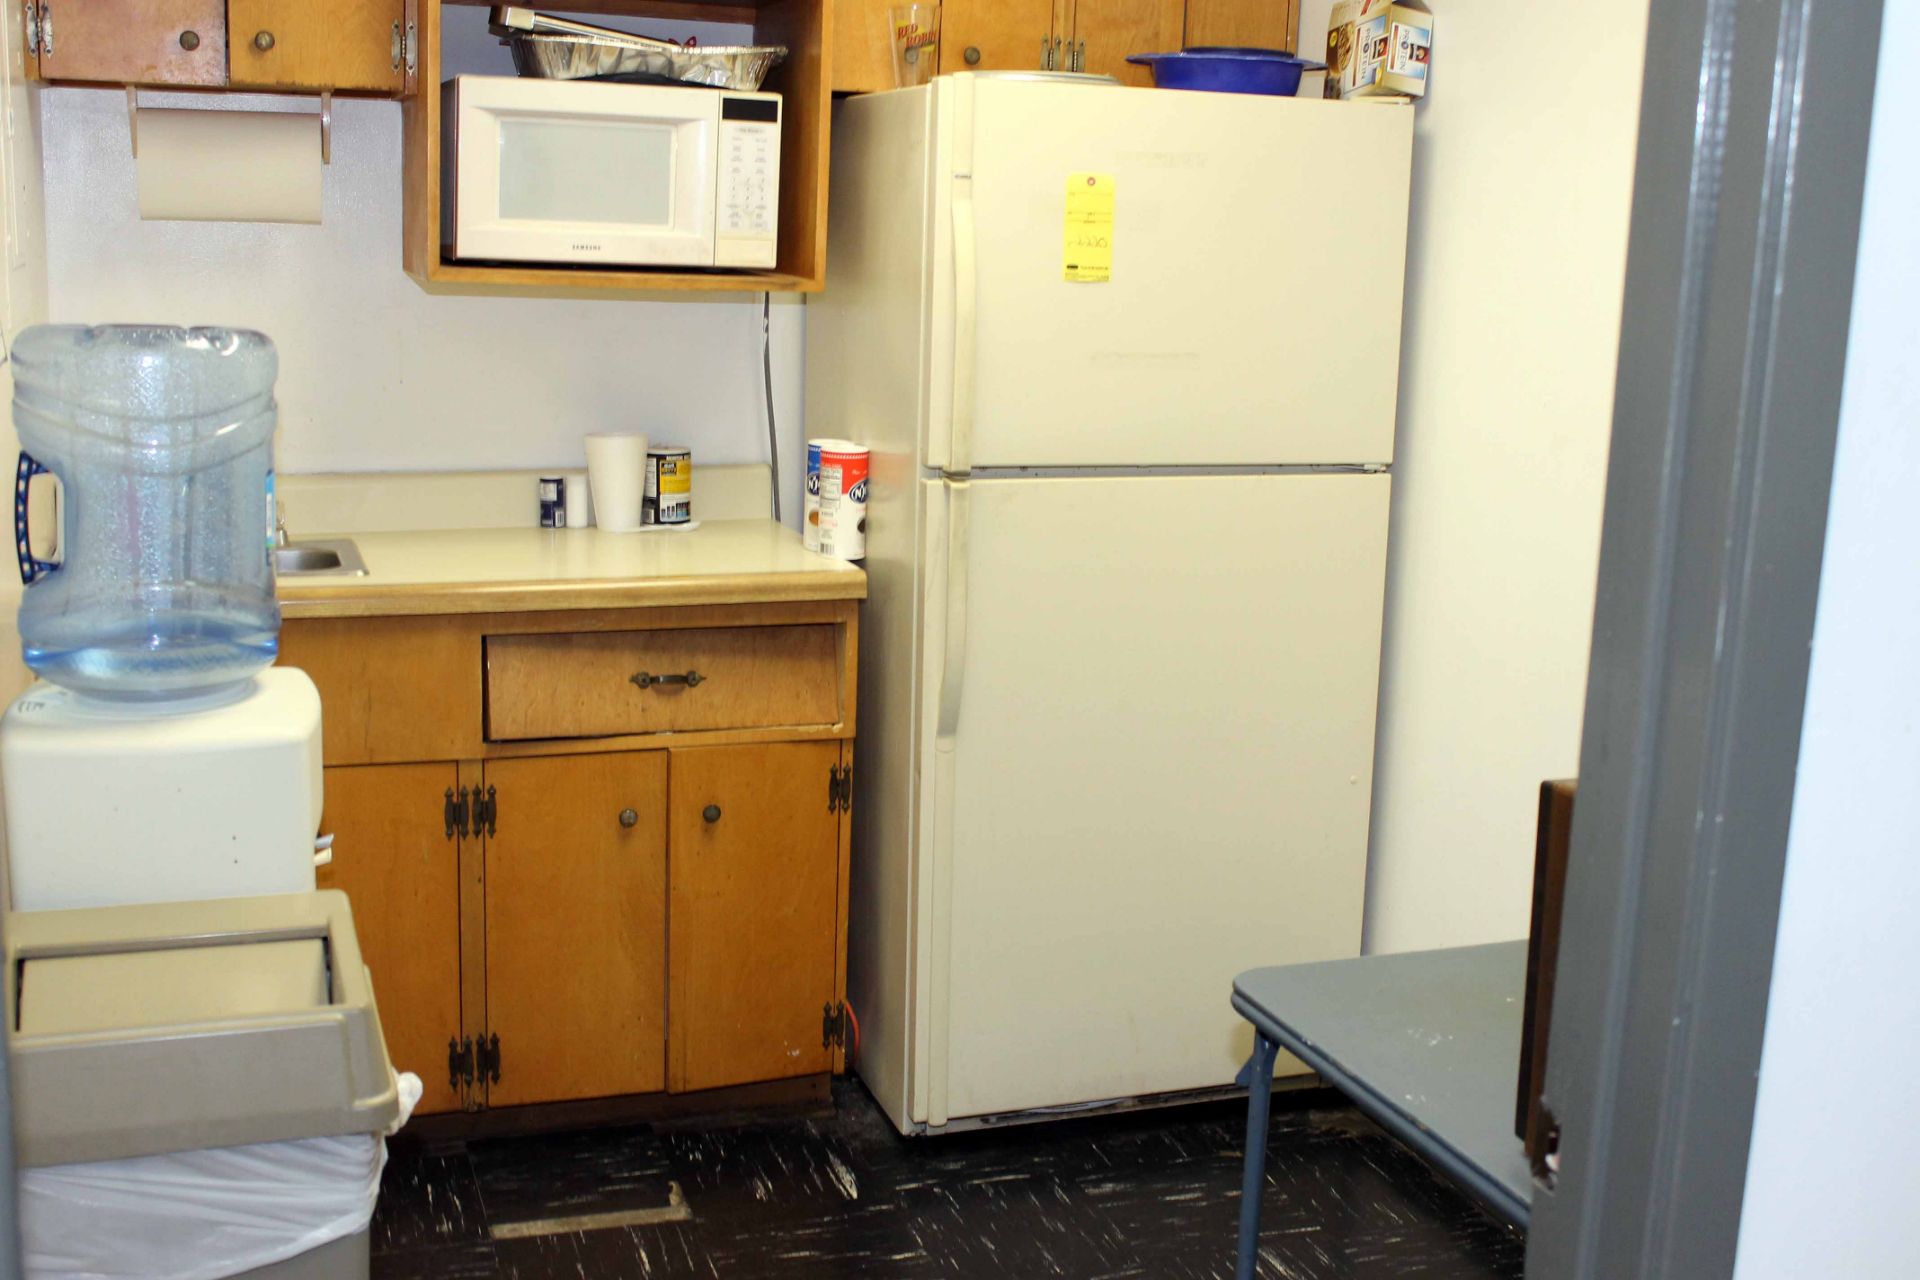 LOT OF CONTENTS OF BREAKROOM: refrigerator, microwave, water cooler, (nothing attached to walls